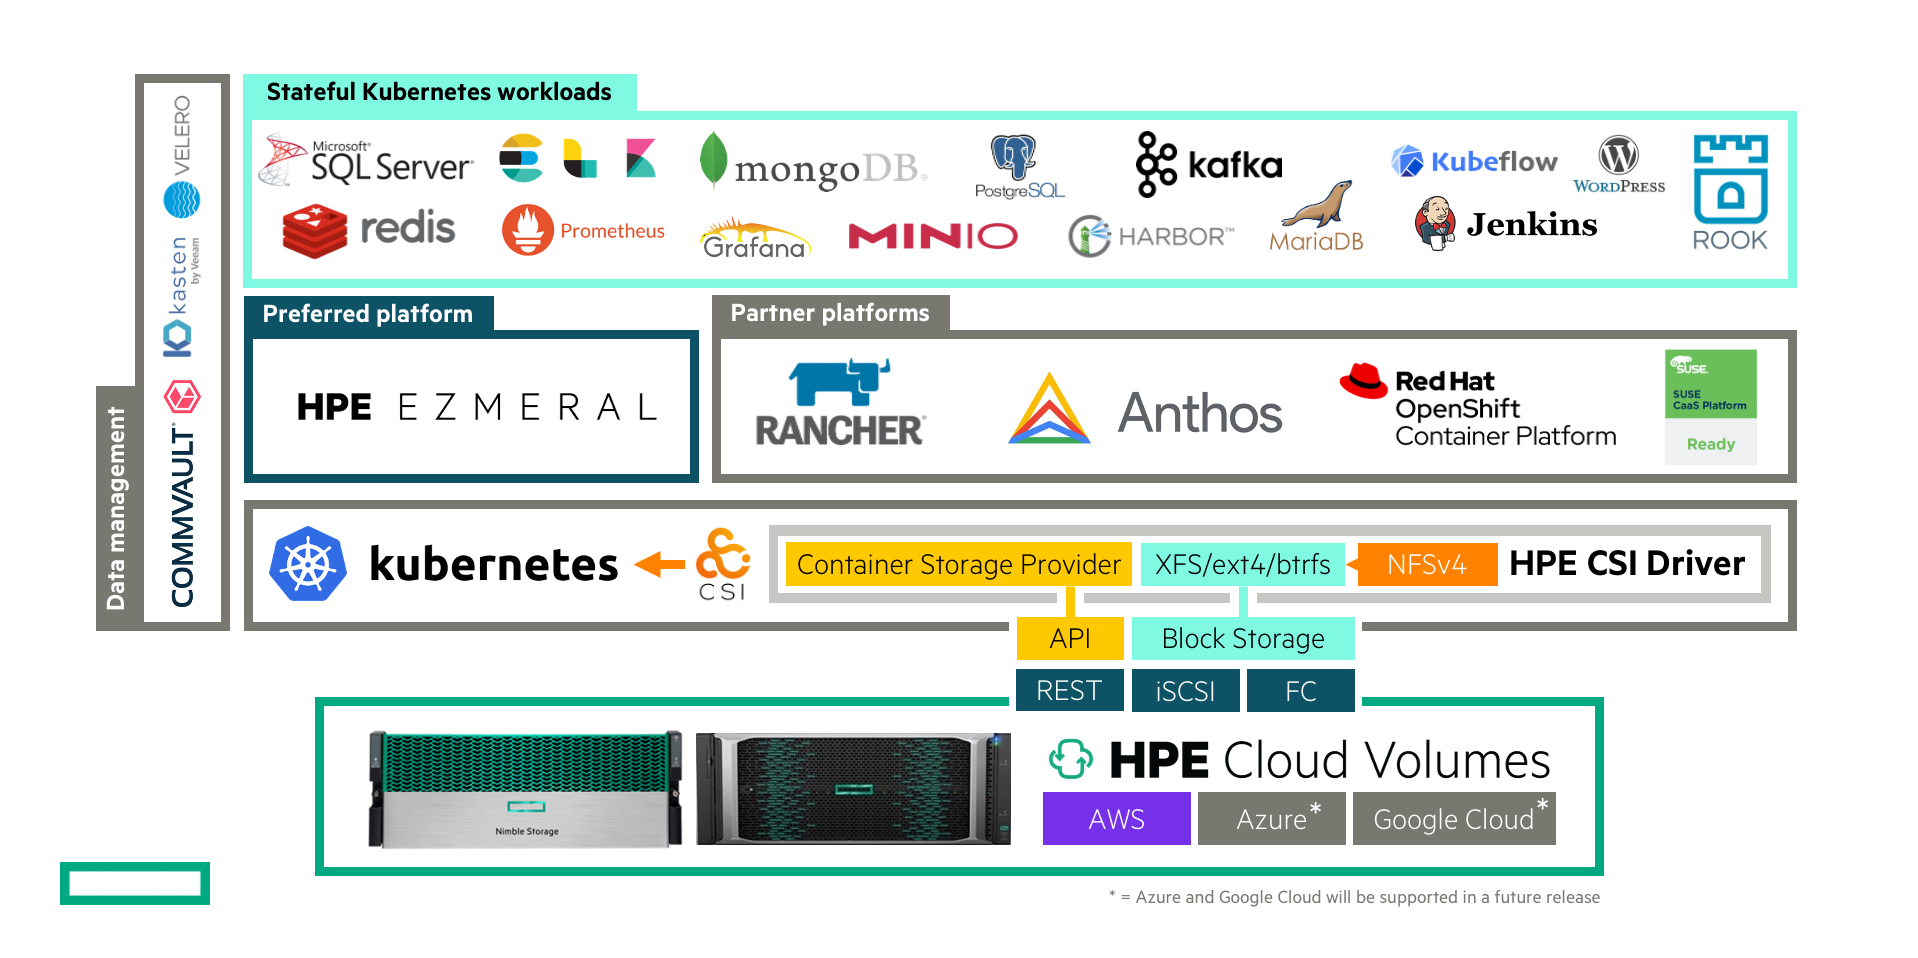 At a glance: HPE CSI Driver for Kubernetes